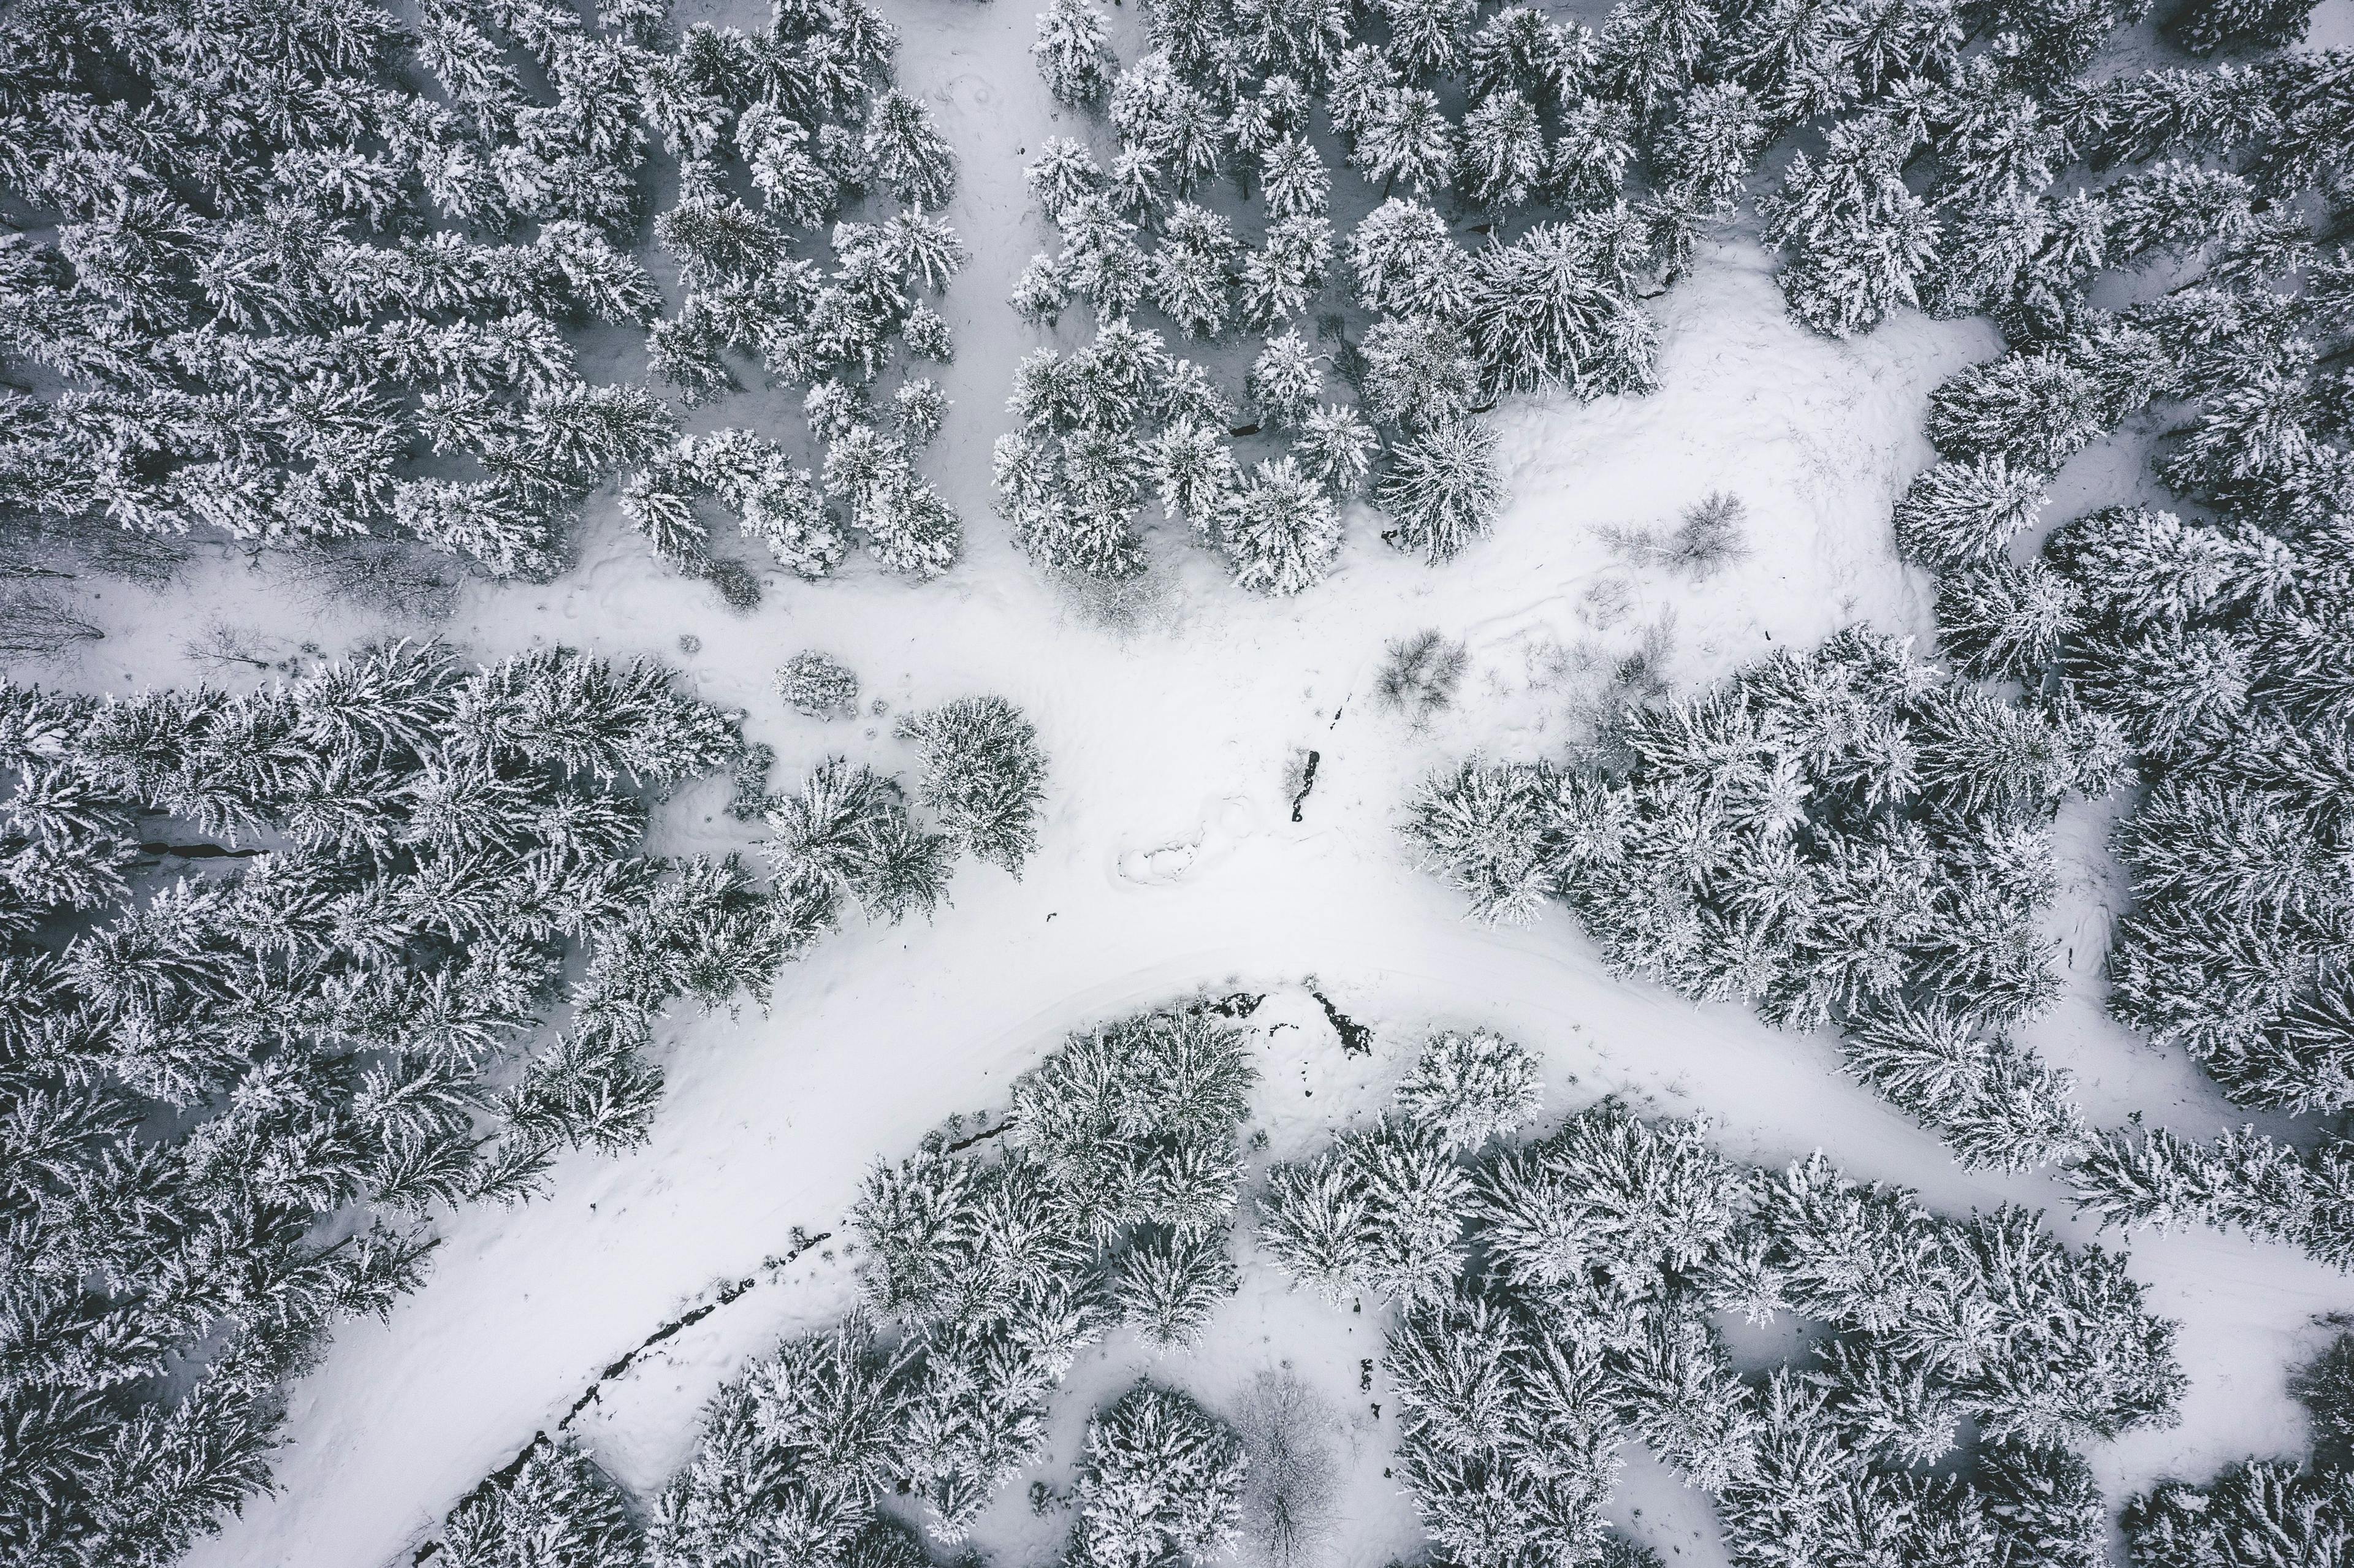 Arial of paths intersecting through a snow covered forest